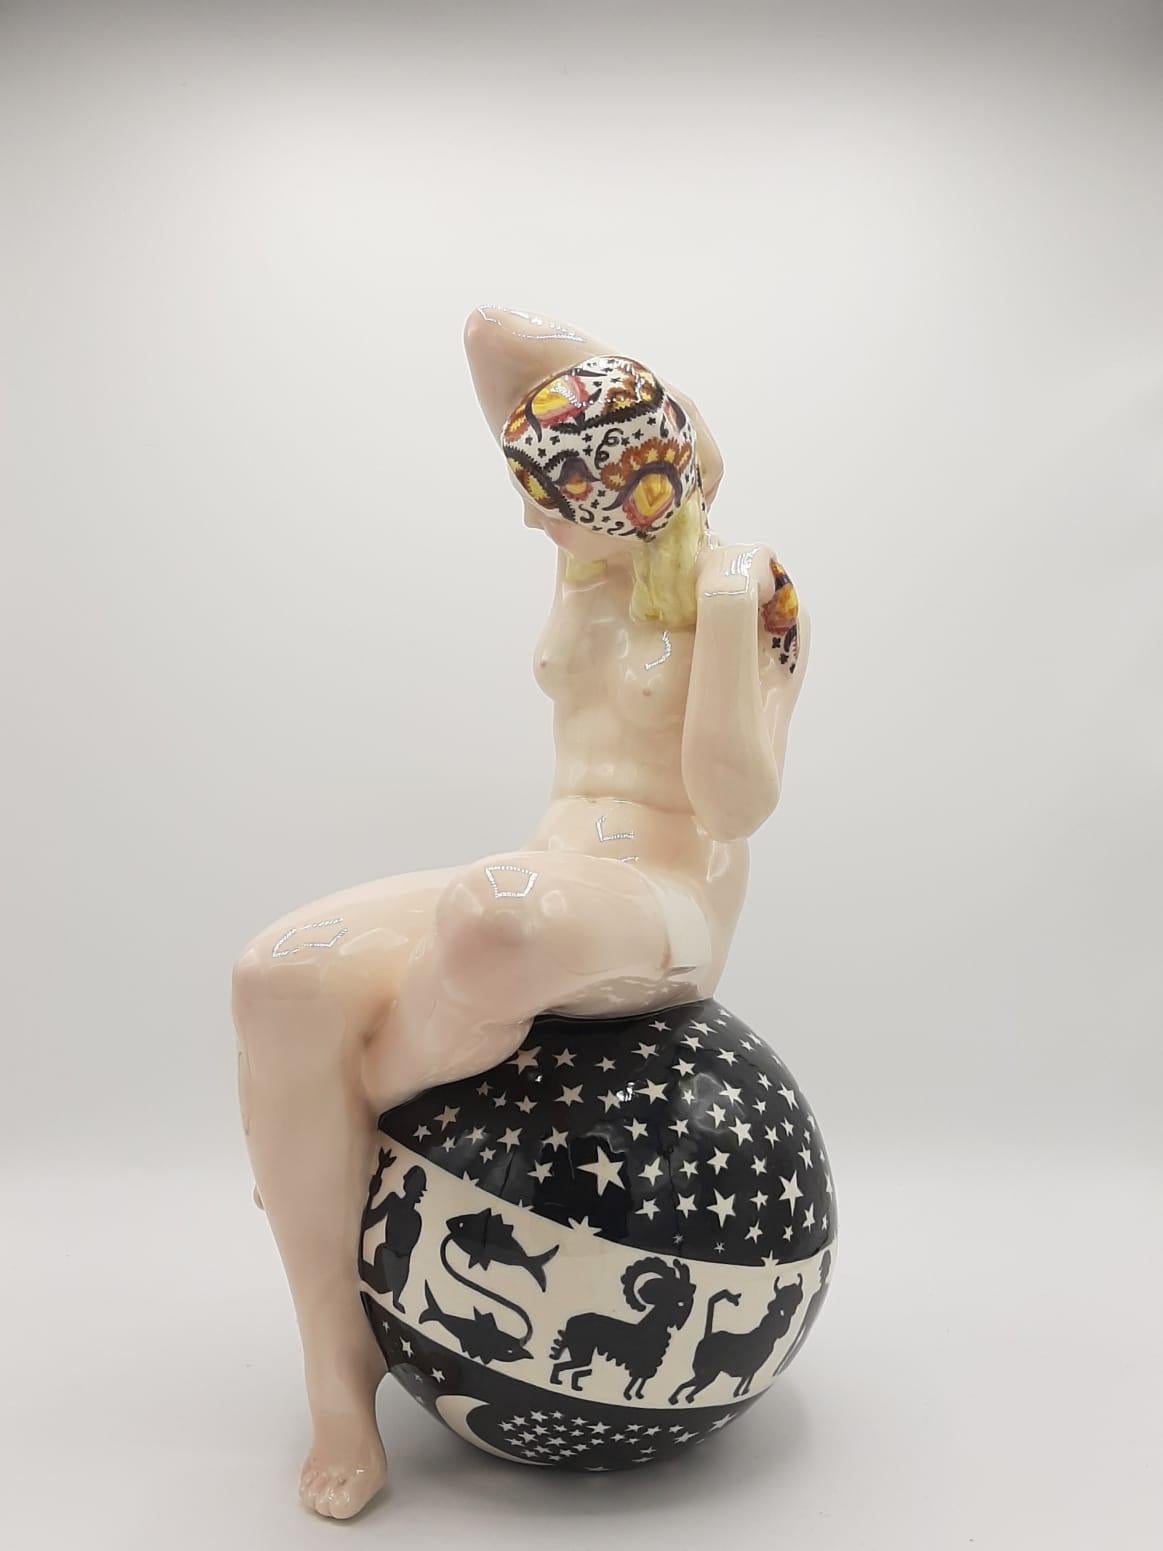 Sandro Vacchetti (Italian, 1889-1976) for Essevi
'Il mondo e il suo castigo': An Earthenware Figure, circa 1930s
polychrome, and modelled as a nude blonde female wearing a headscarf and seated on a ball decorated with stars and signs of the